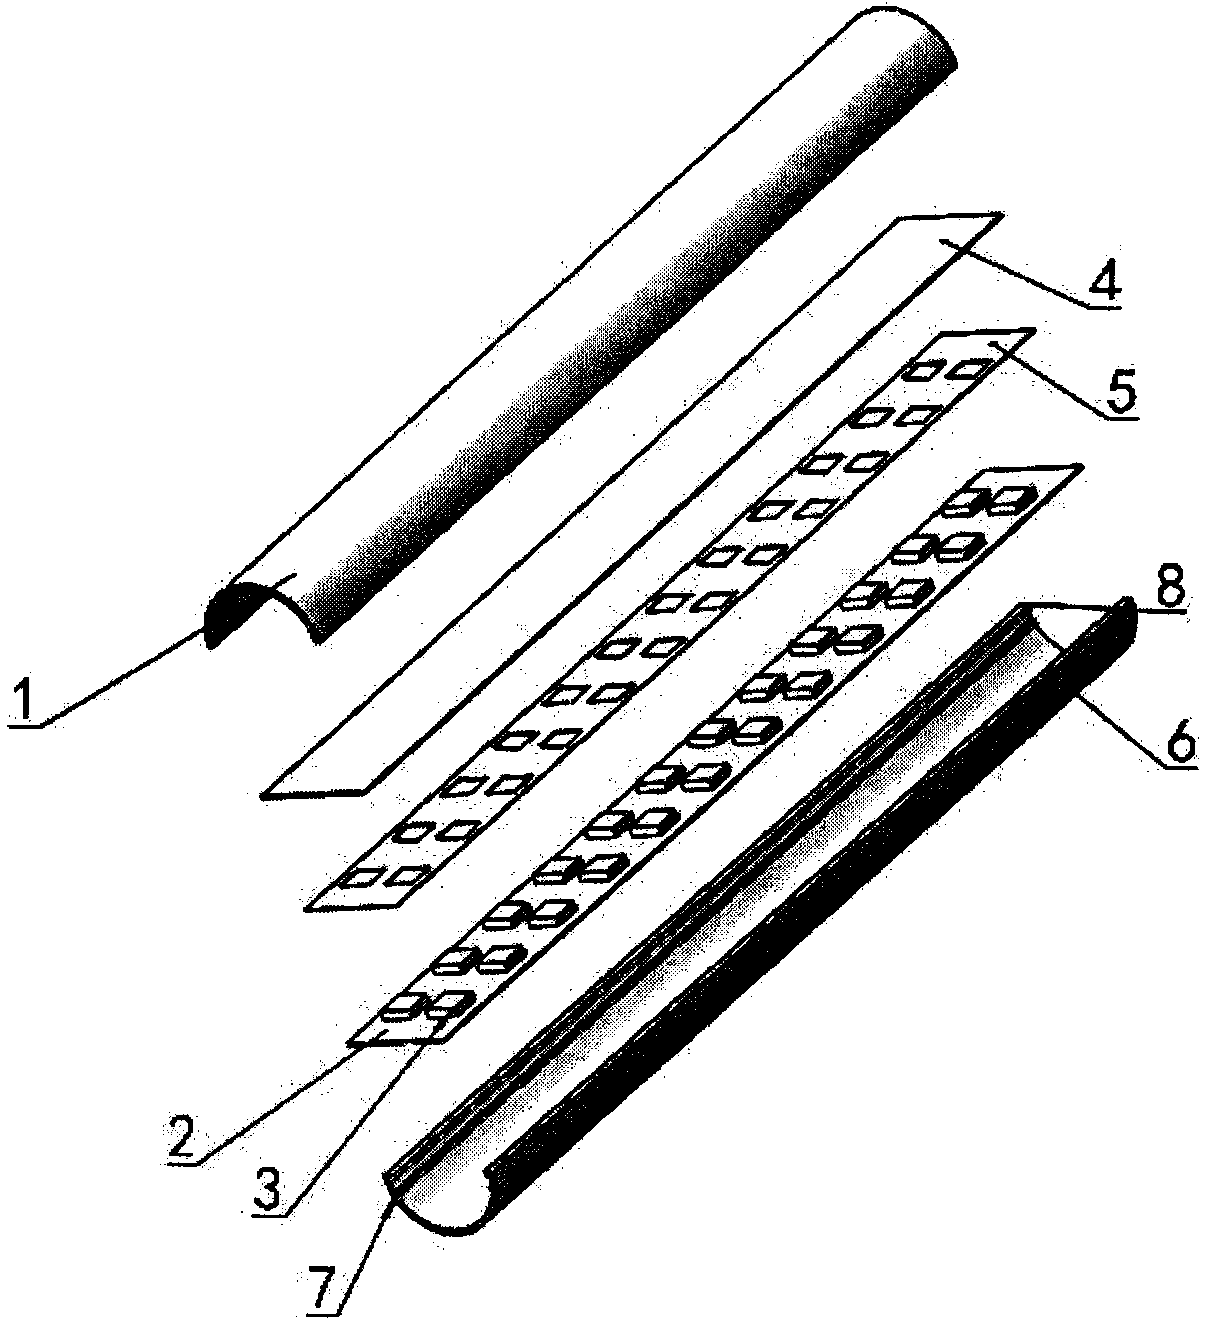 LED fluorescent lamp based on continuous spectrum fluorescent powder